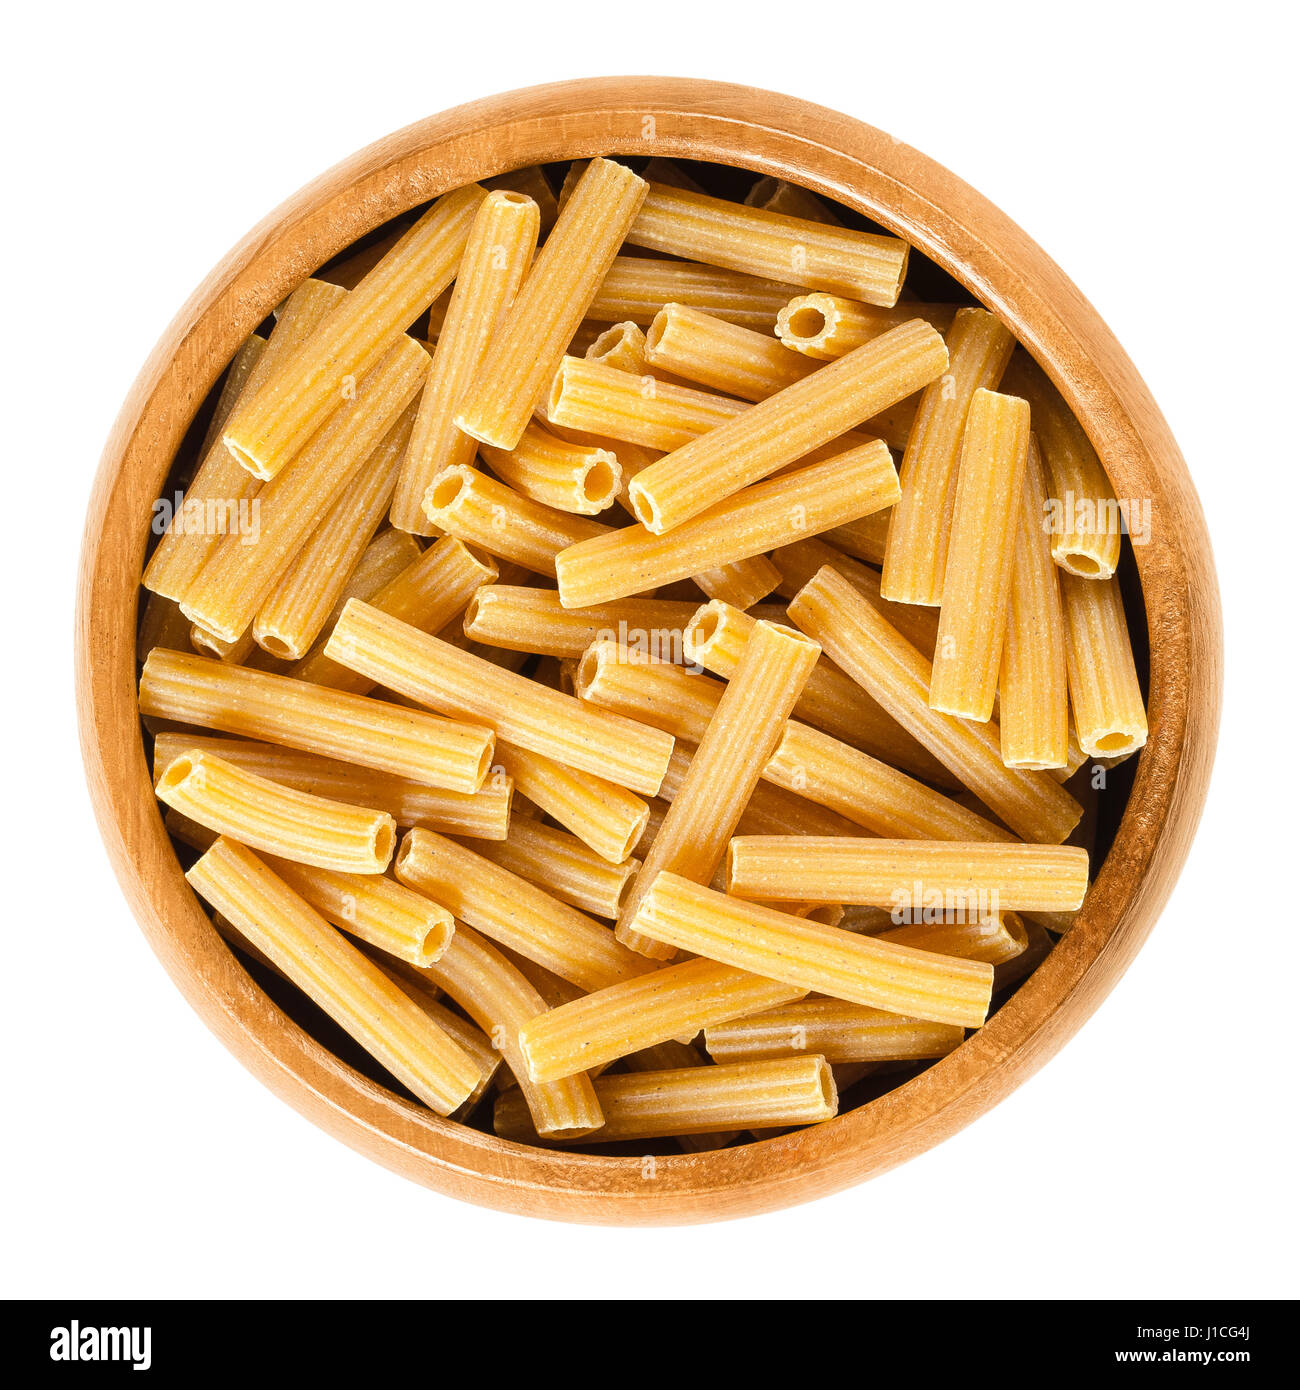 Chickpeas sedanini rigati pasta in wooden bowl. Uncooked dried glutenfree noodles made from Cicer arietinum flour. Short length tubes with ridges. Stock Photo